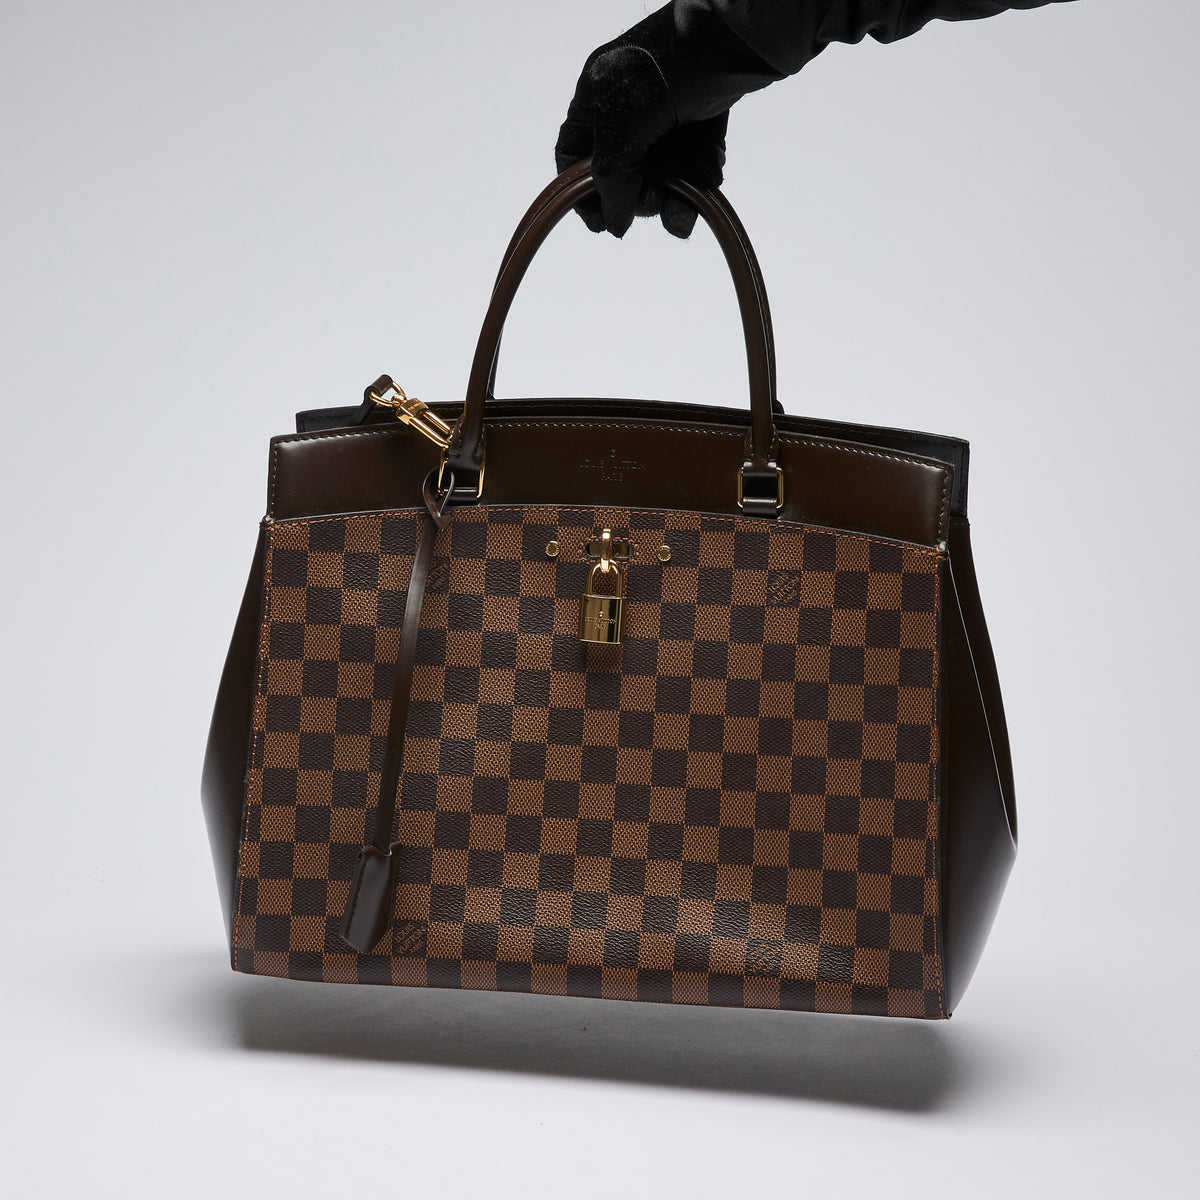 Excellent Pre-Loved Brown Checker Patterned Coated Canvas and Brown Smooth Leather Top Handle Tote Bag with Removable Shoulder Strap.(front)